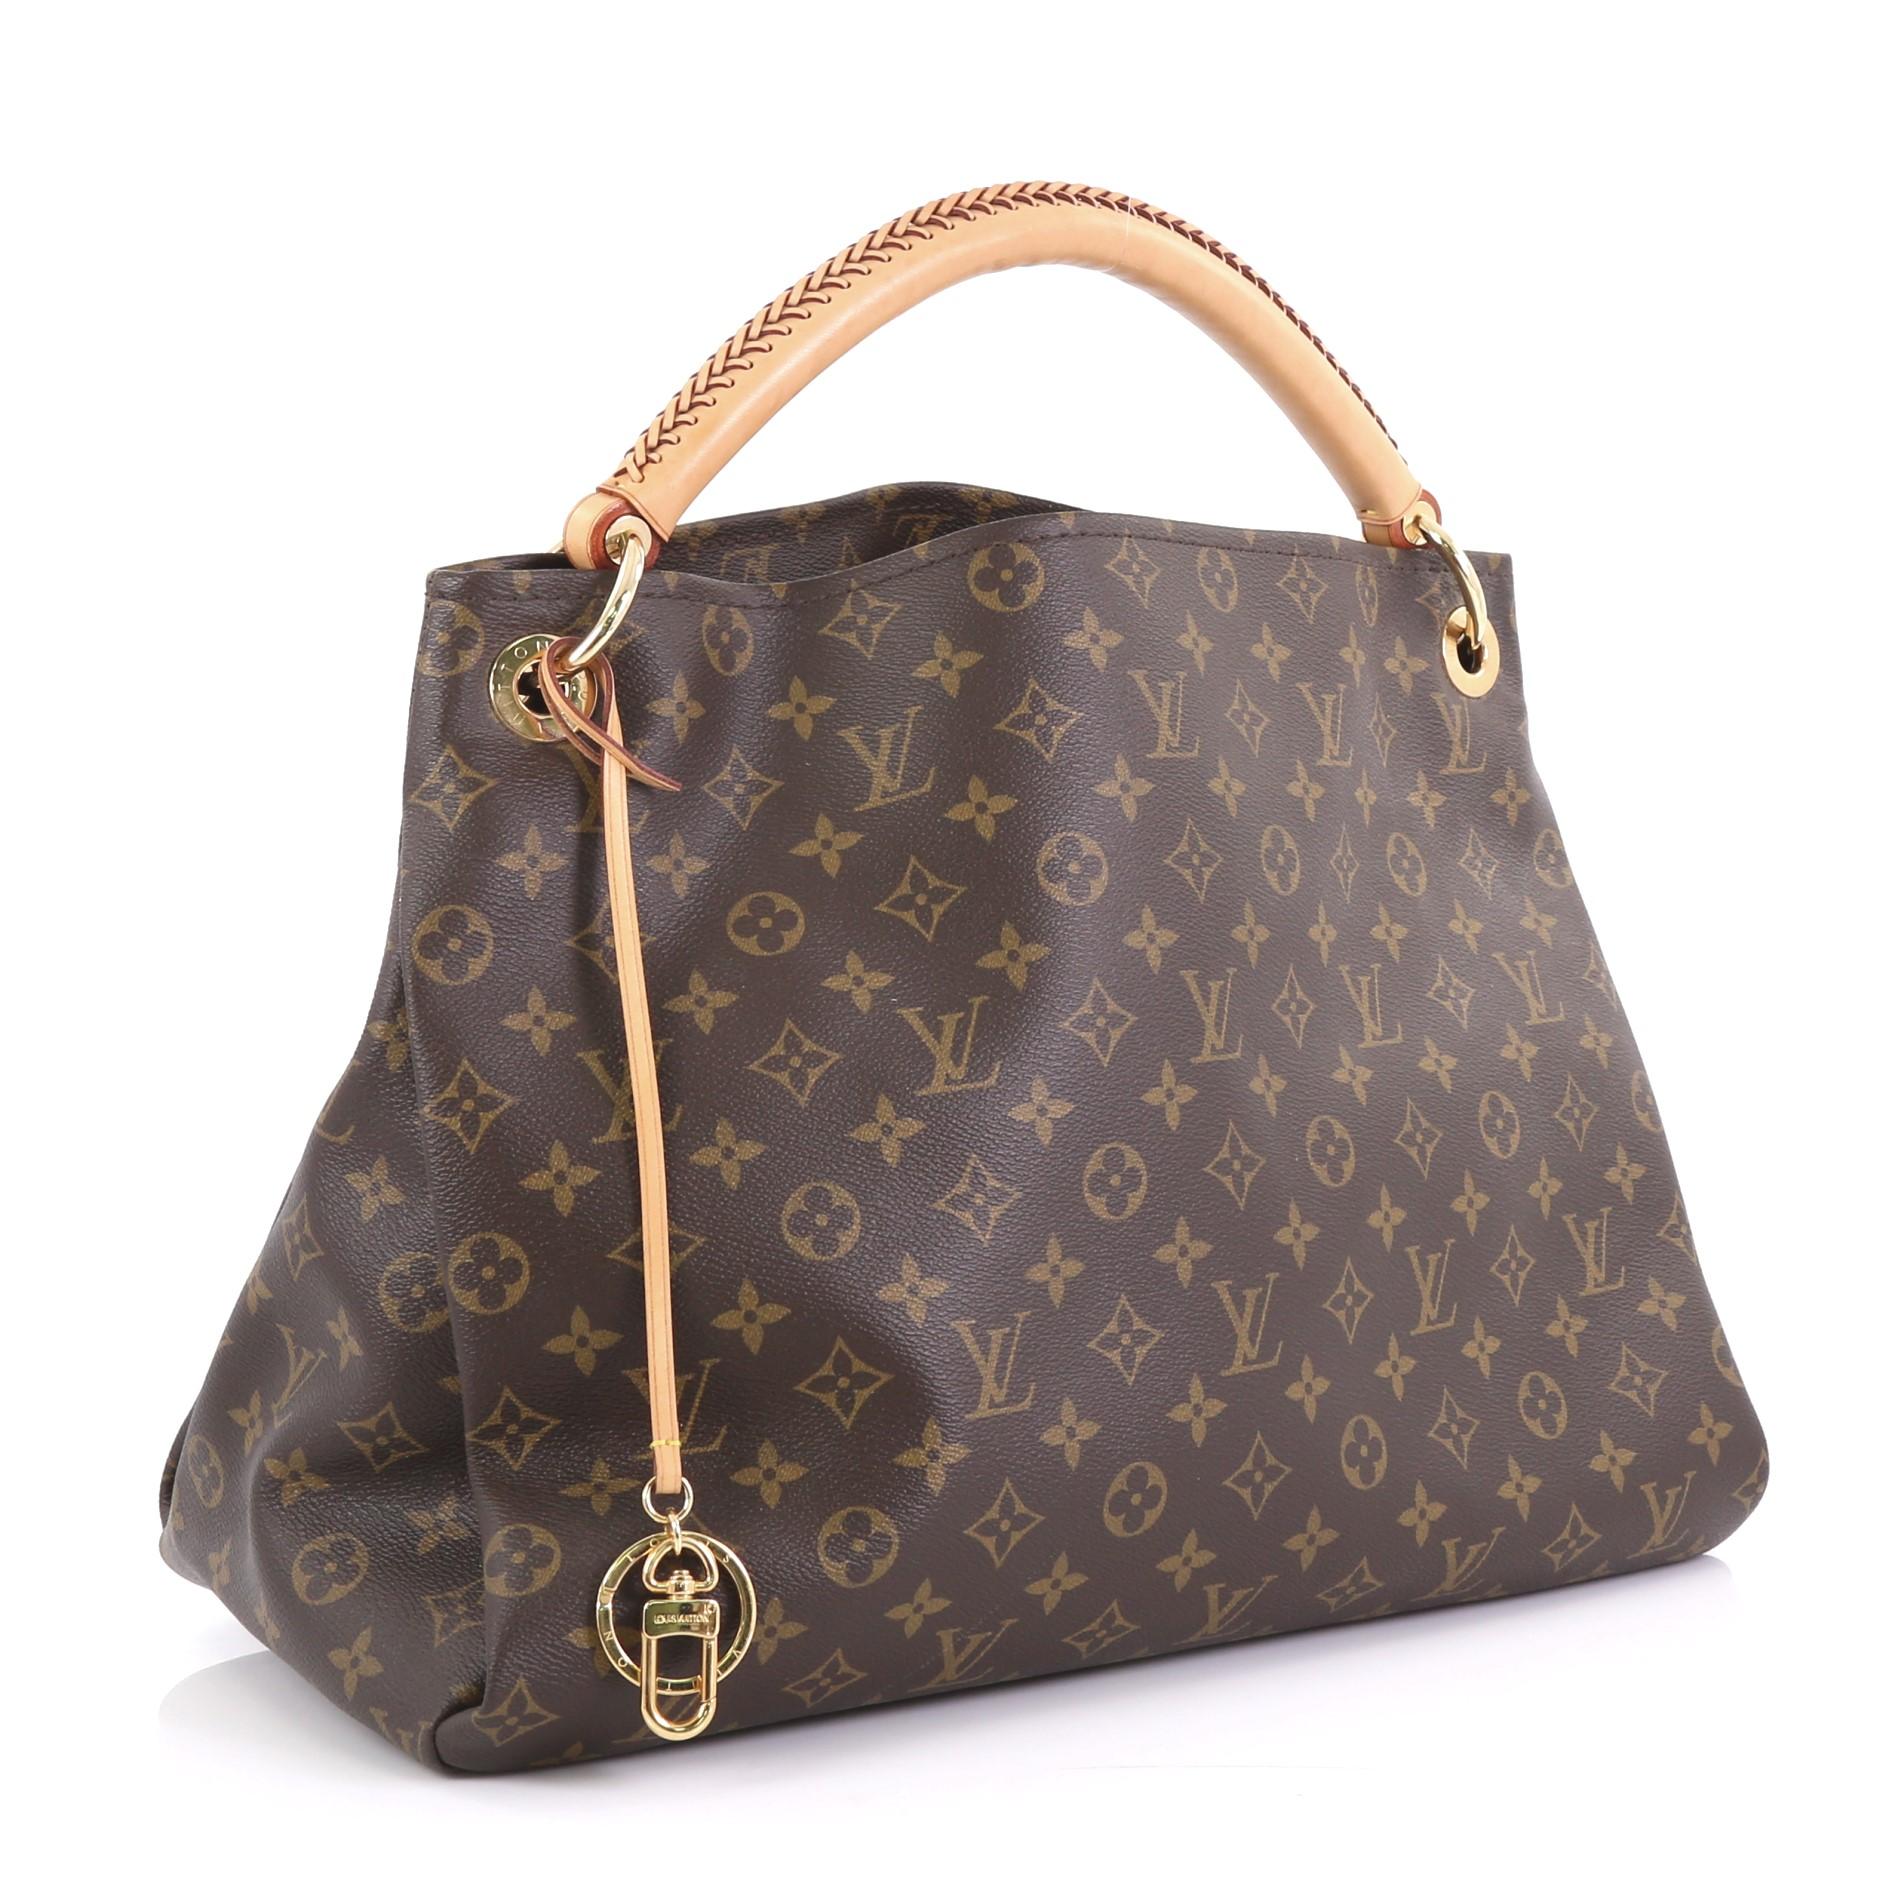 This Louis Vuitton Artsy Handbag Monogram Canvas MM, crafted from brown monogram coated canvas, features a rolled leather handle with braided detailing, protective base studs, and gold-tone hardware. It opens to a beige microfiber interior with side